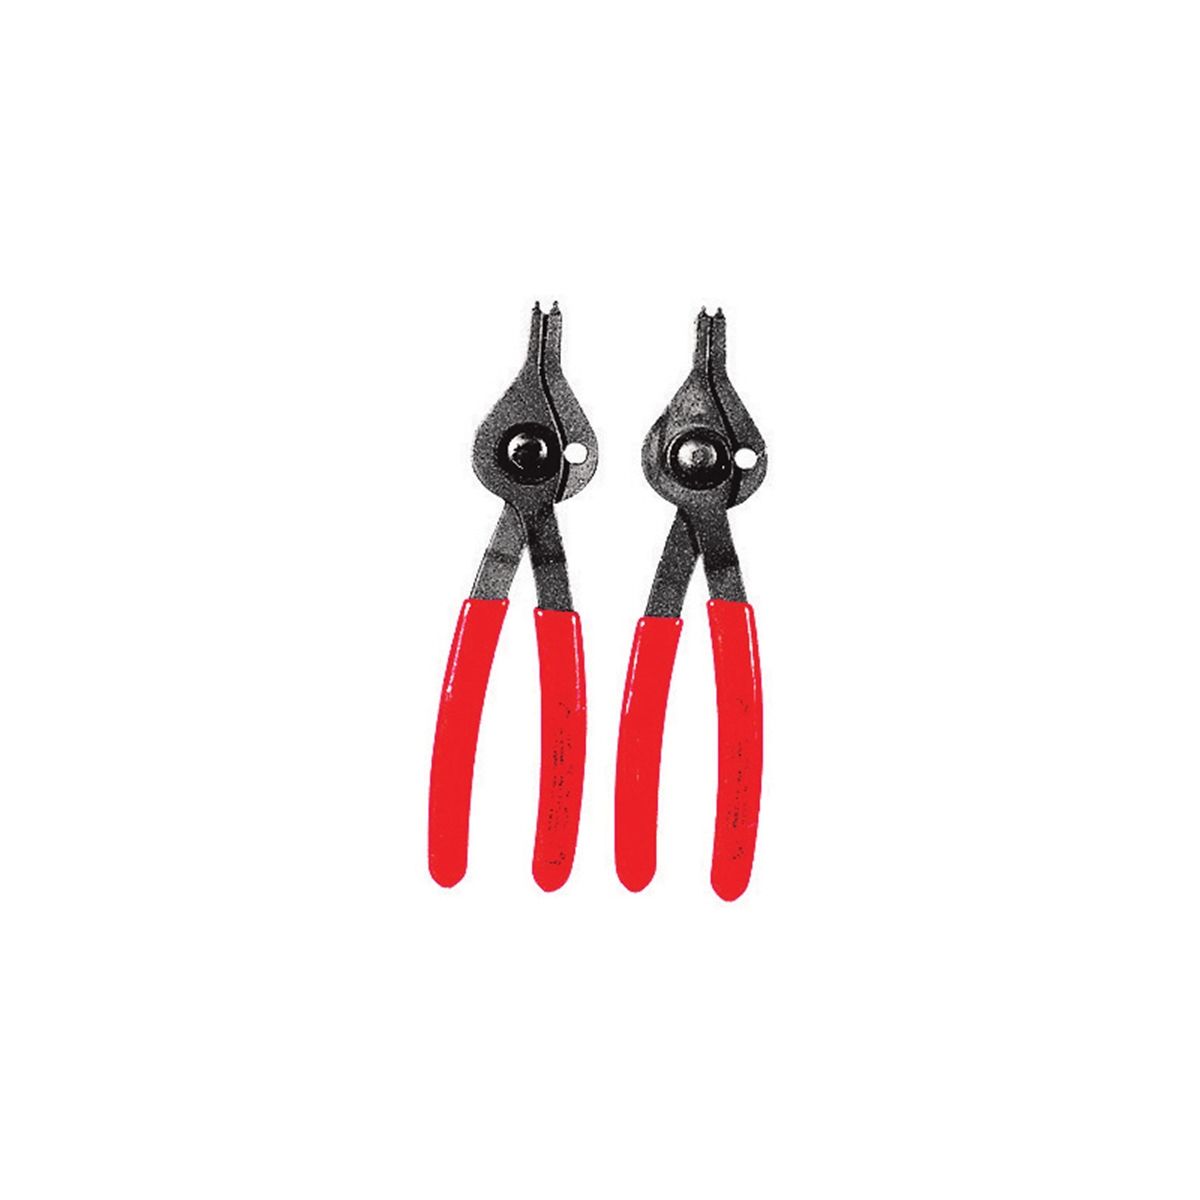 Straight Reversible Snap Ring Plier - Small Tip